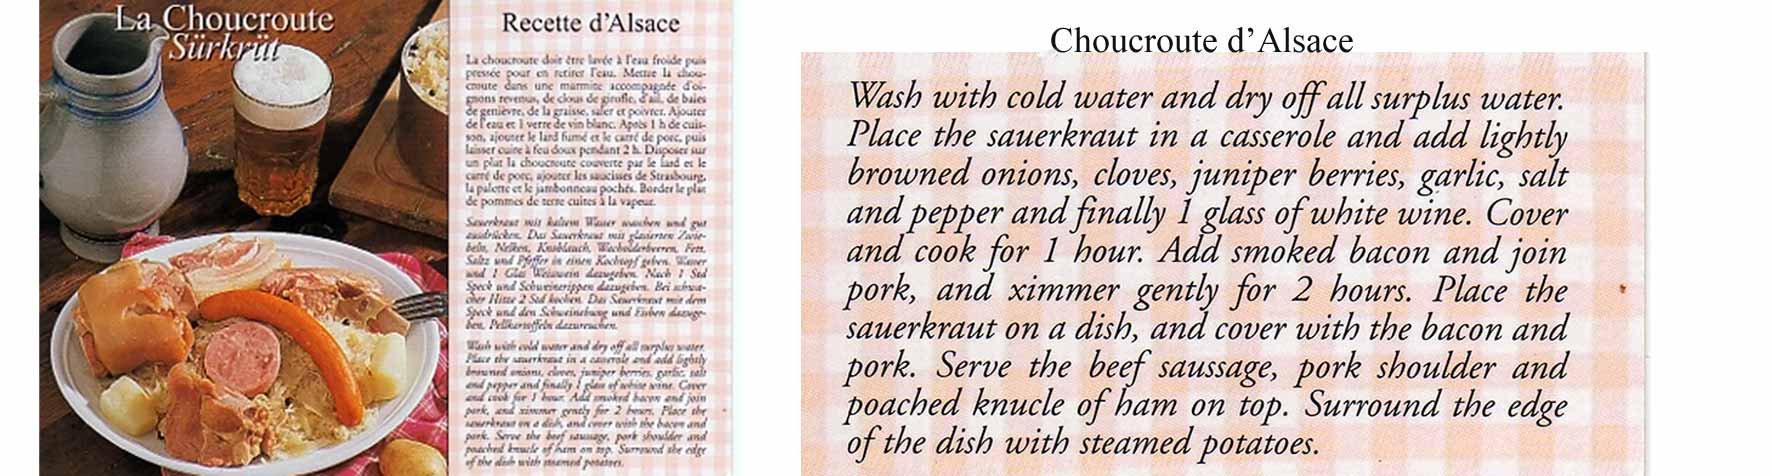  French postcard (left) with enlarged recipe (right) by Combier Groupe Editor with choucroute photo by B. Arguello